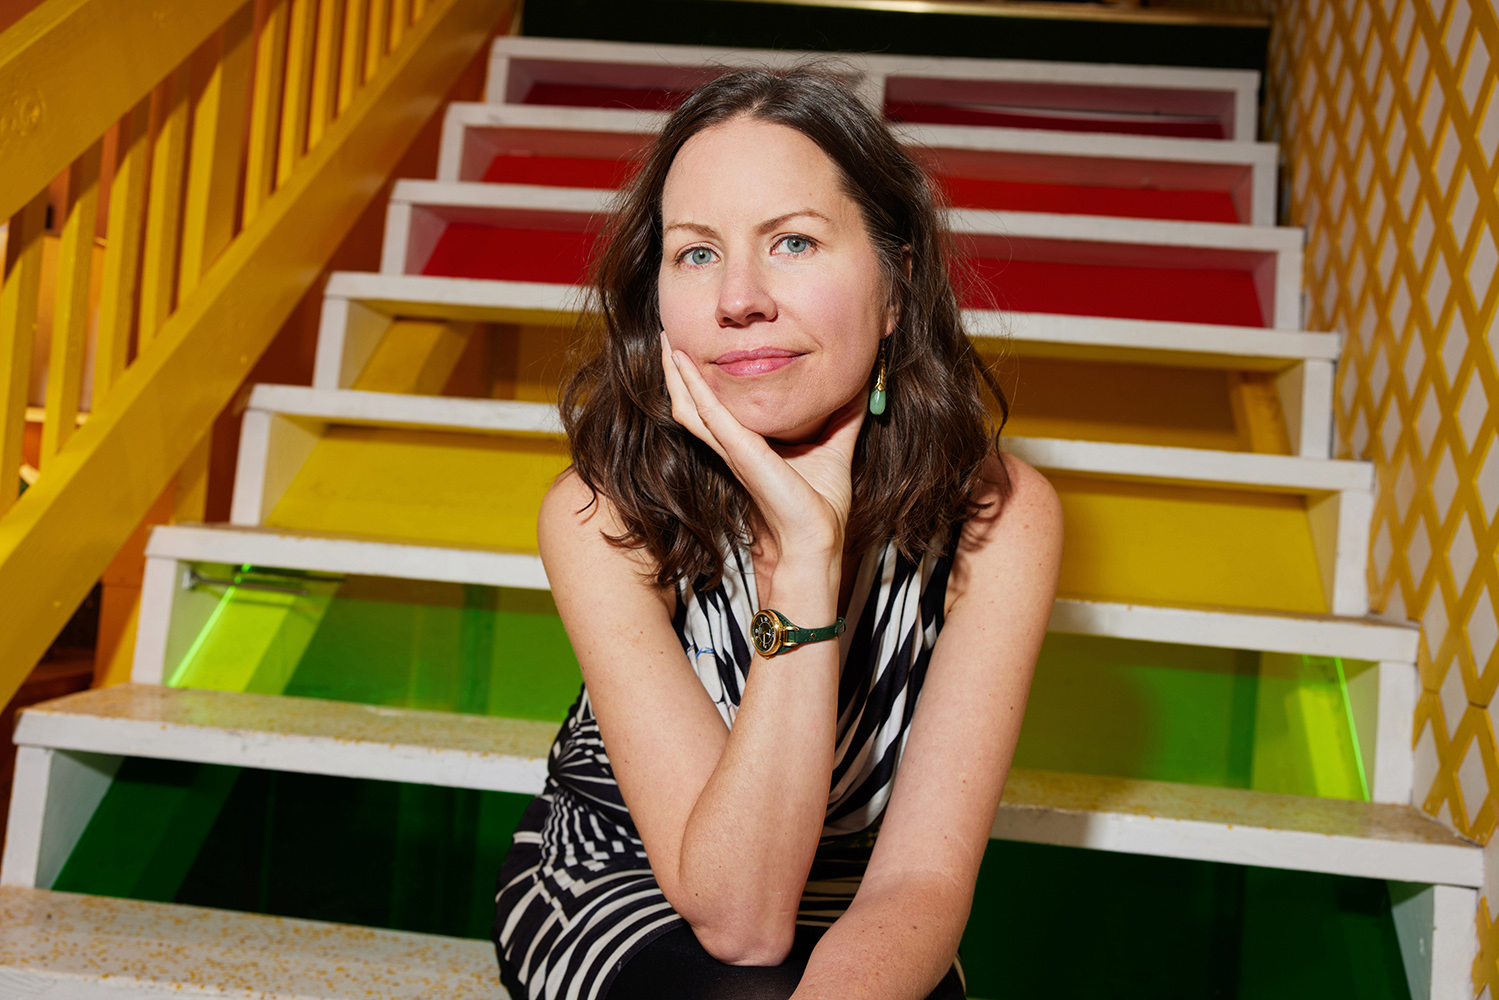 Color photograph of a light skinned woman sitting on a multicolored staircase; she looks at the camera as she rests her head on her hand